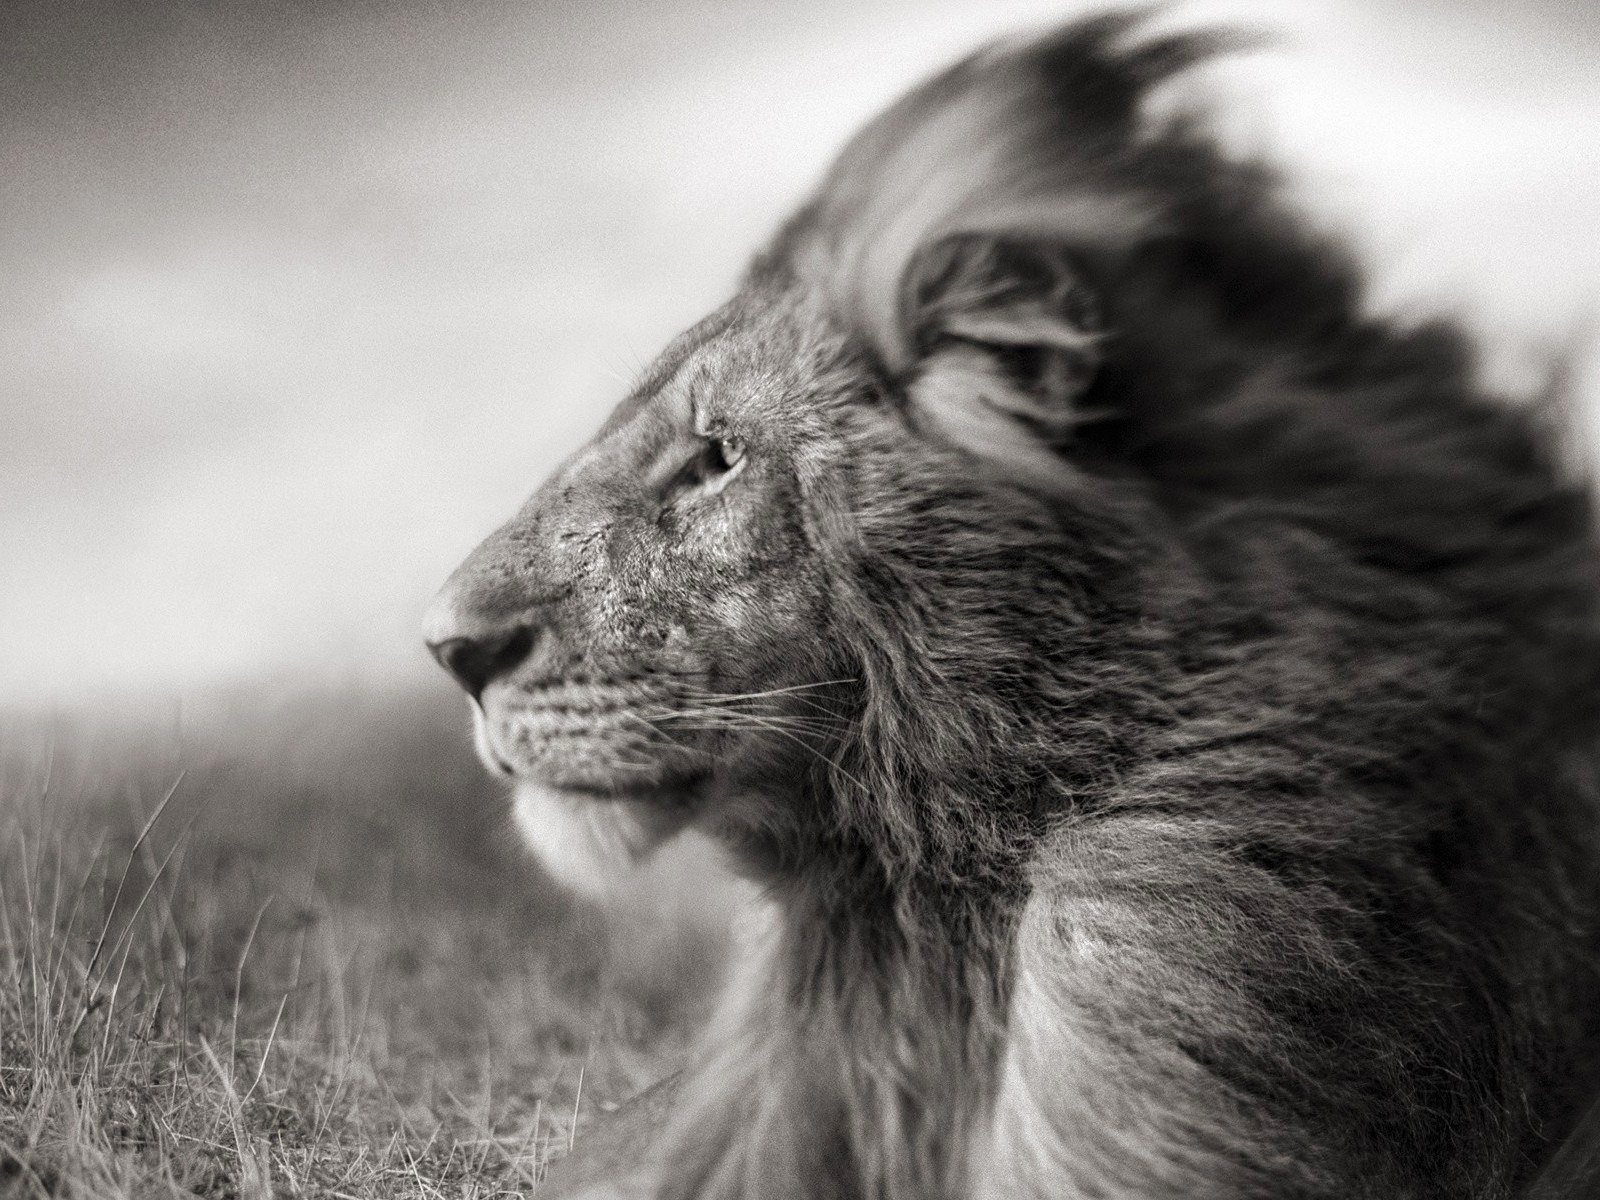 Portrait Of A Lion In Black And White Wallpaper for Desktop 1600x1200